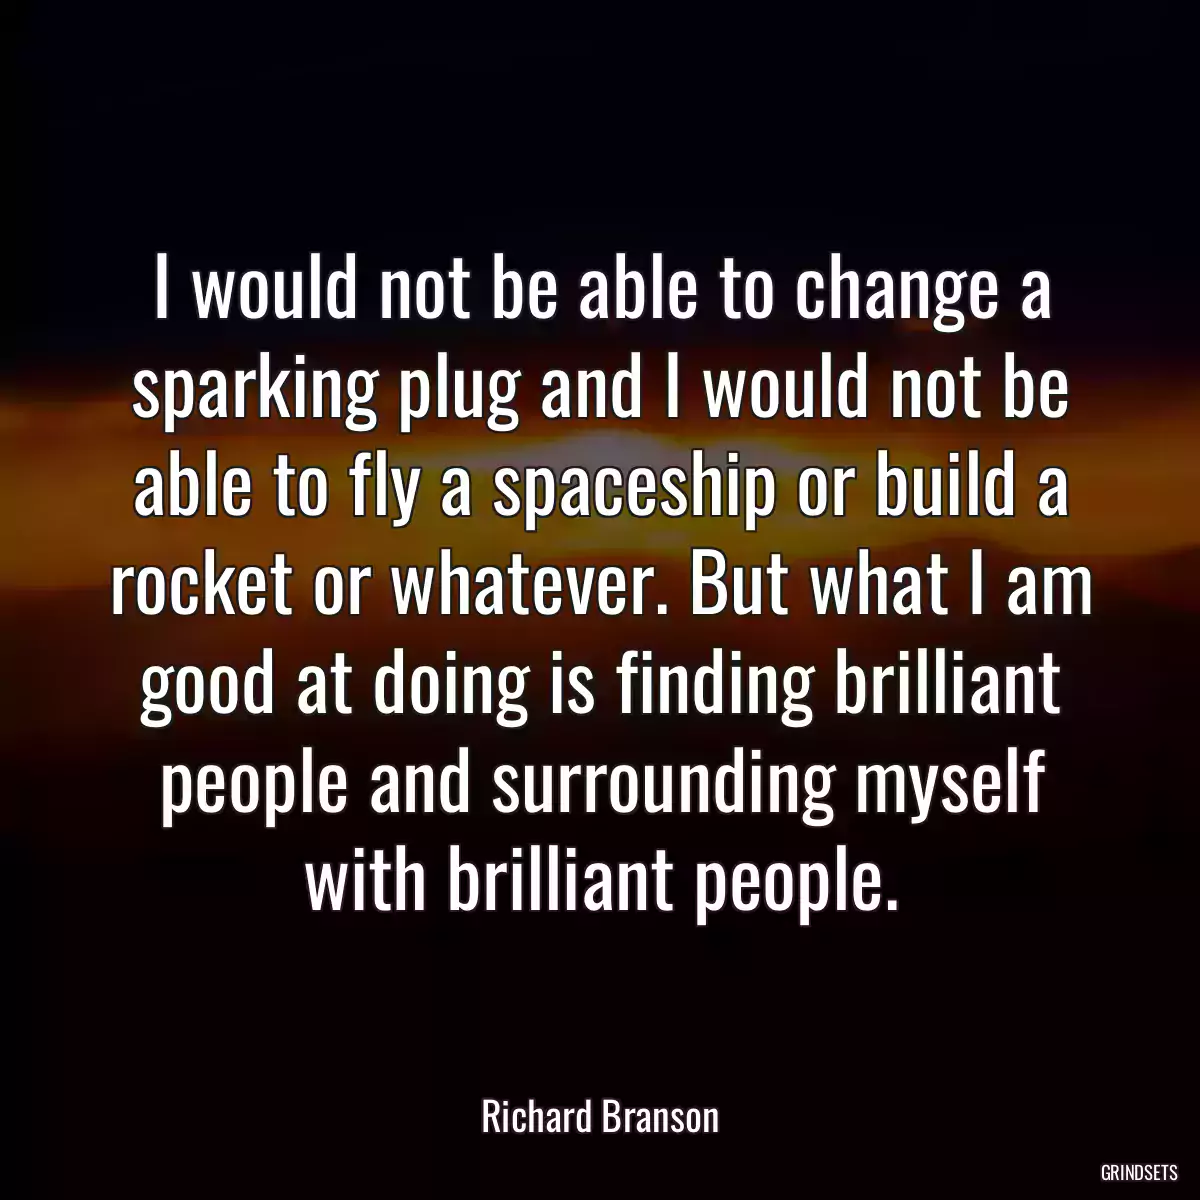 I would not be able to change a sparking plug and I would not be able to fly a spaceship or build a rocket or whatever. But what I am good at doing is finding brilliant people and surrounding myself with brilliant people.